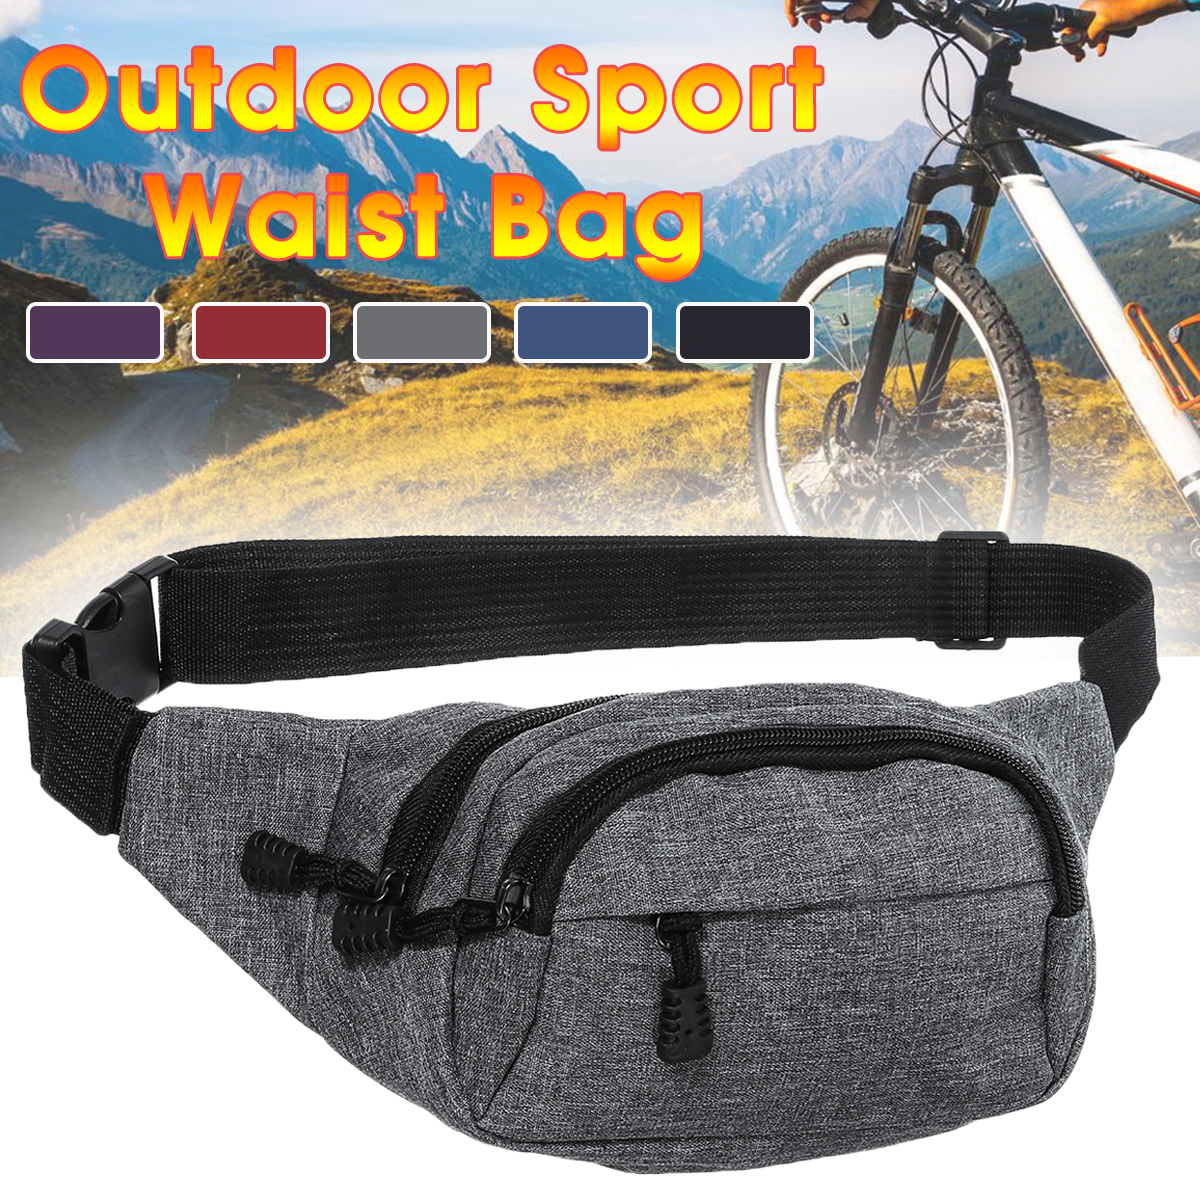 Large-Capacity-Sports-Waist-Bag-Phone-Bag-Crossnody-Bag-For-Outdoor-Sports-Hiking-Jogging-Running-1534489-1